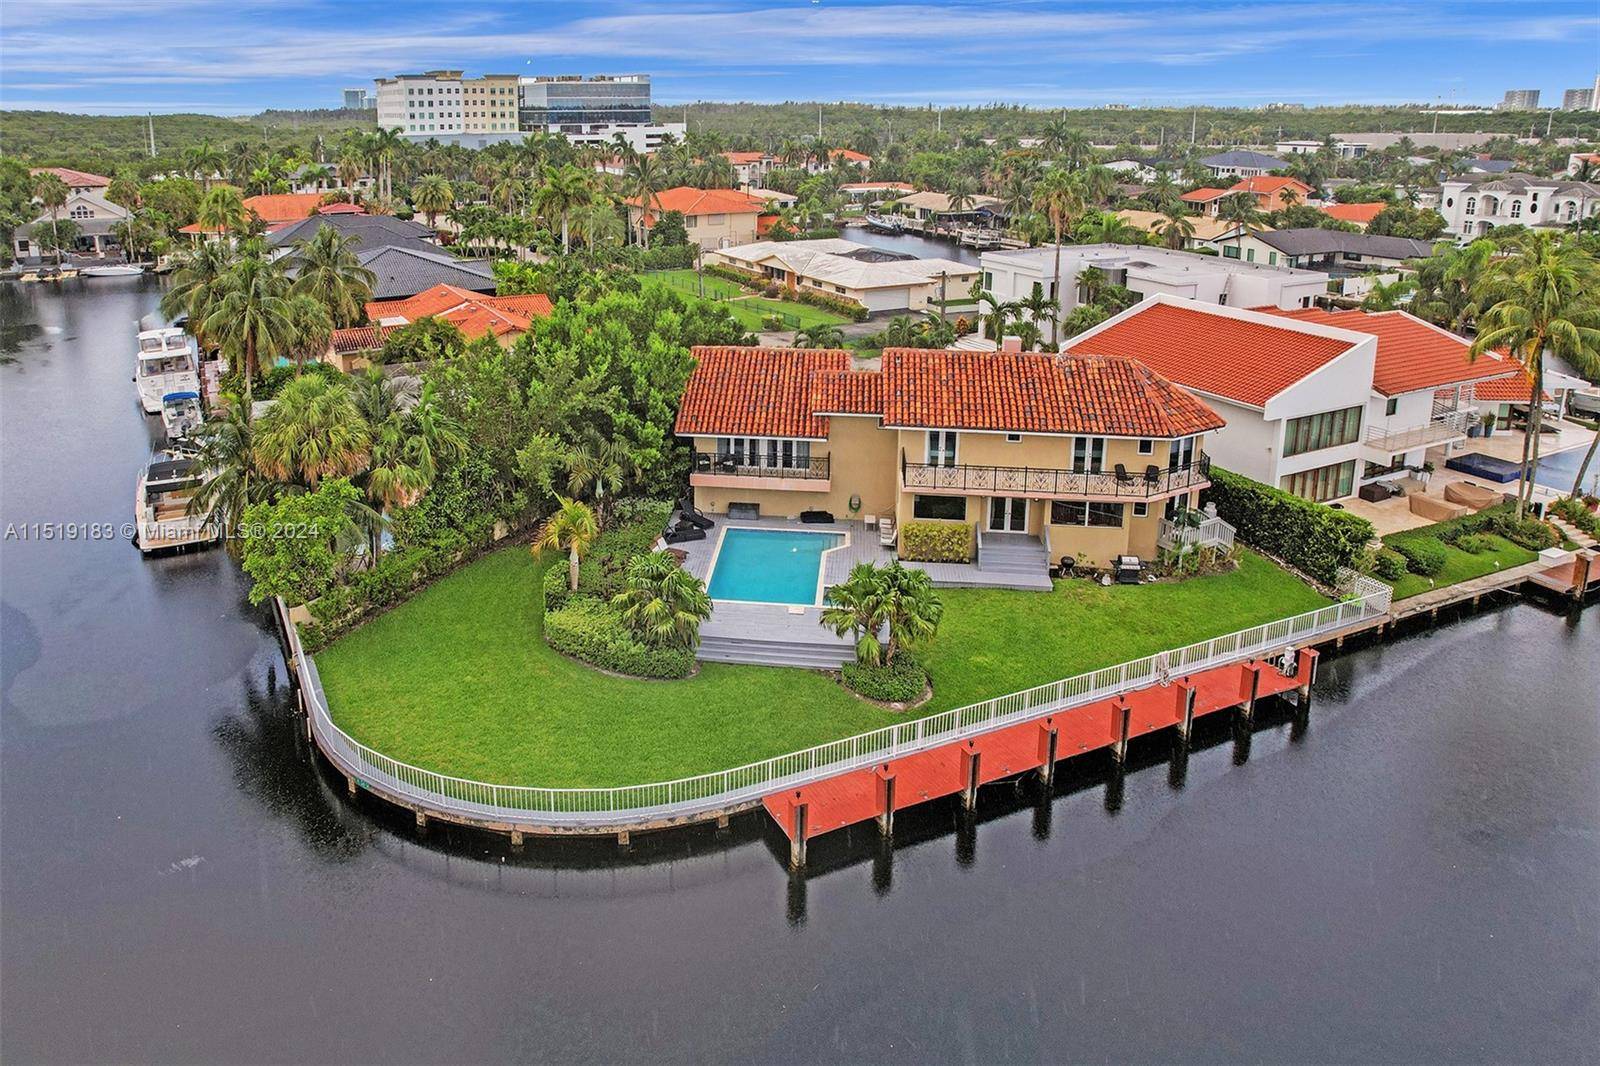 This incredible home is on private cul de sac street in a gated community on the water in desirable Easter Shores.